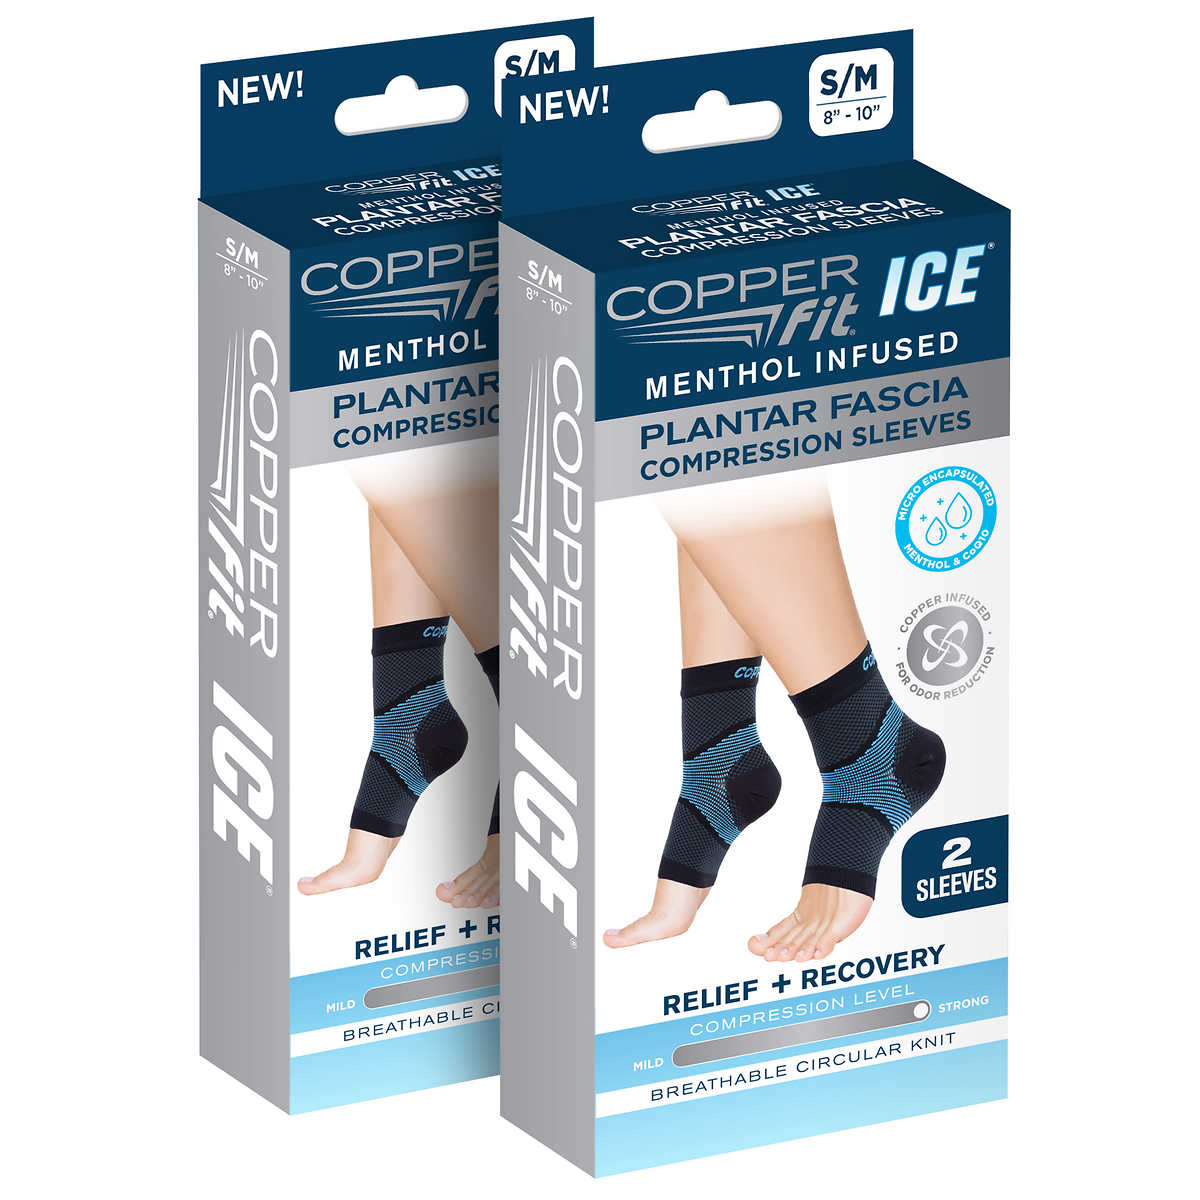 Copper Fit Ice Plantar Fascia Compression Sleeves, 2 Pairs